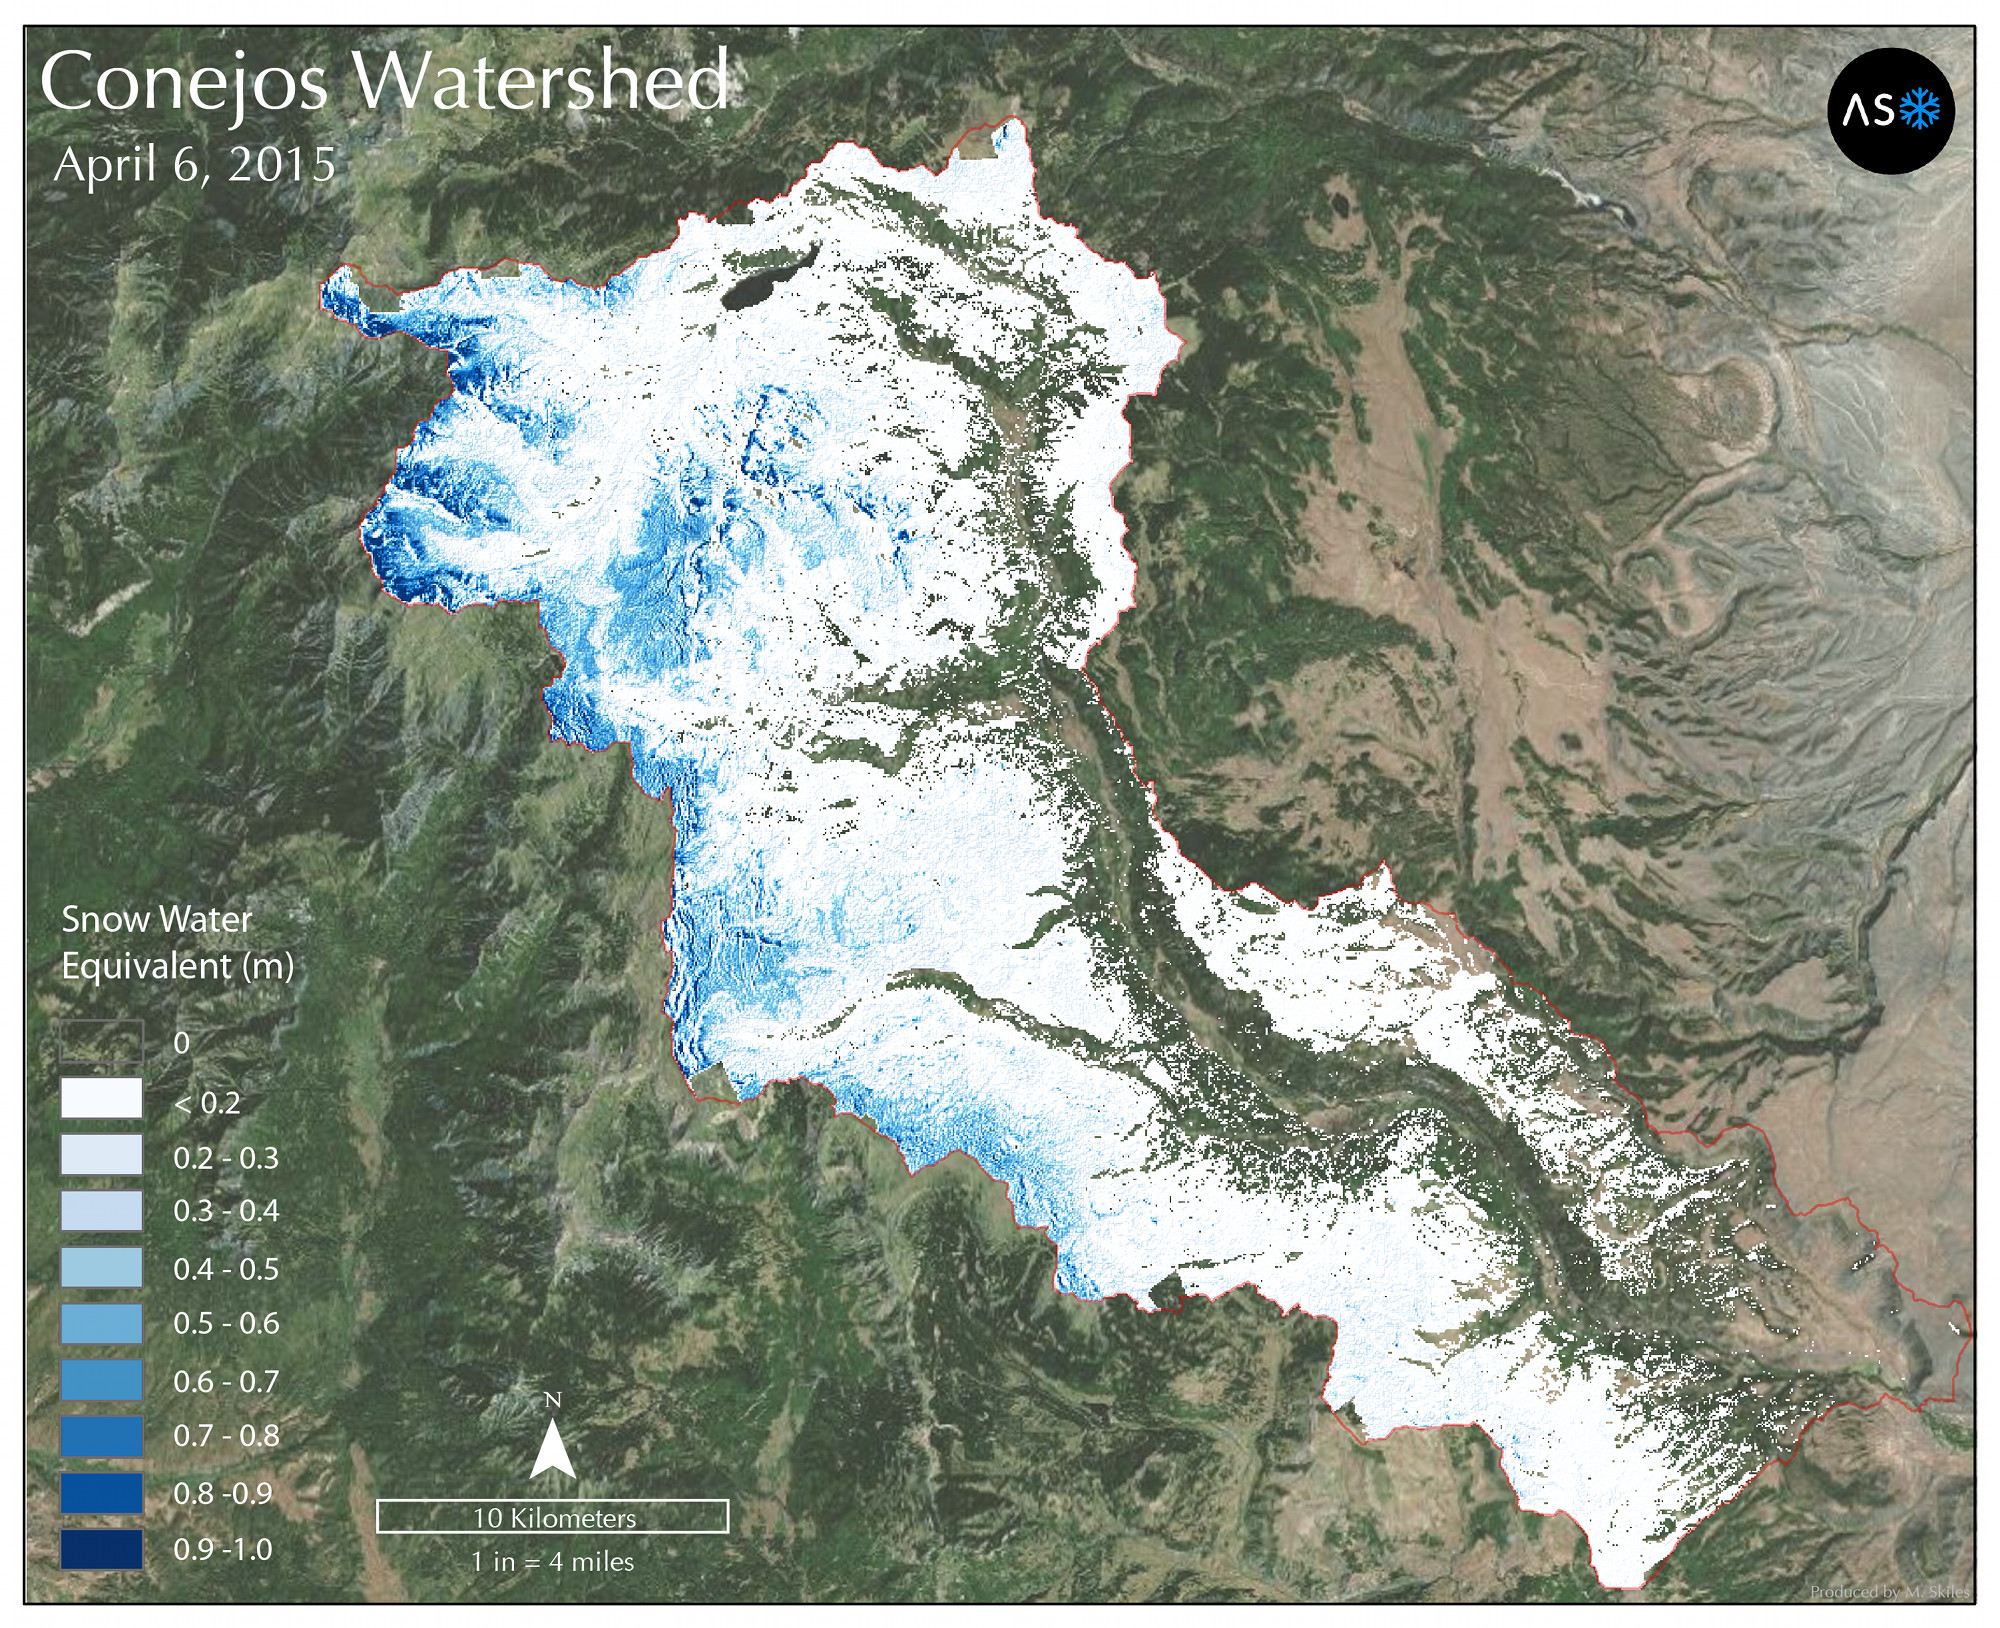 Snow water equivalent across the upper Conejos Watershed, located in south central Colorado and part of the headwaters for the Rio Grande, on April 6th, 2015. Image by Airborne Snow Observatory program, NASA/JPL, California Institute of Technology